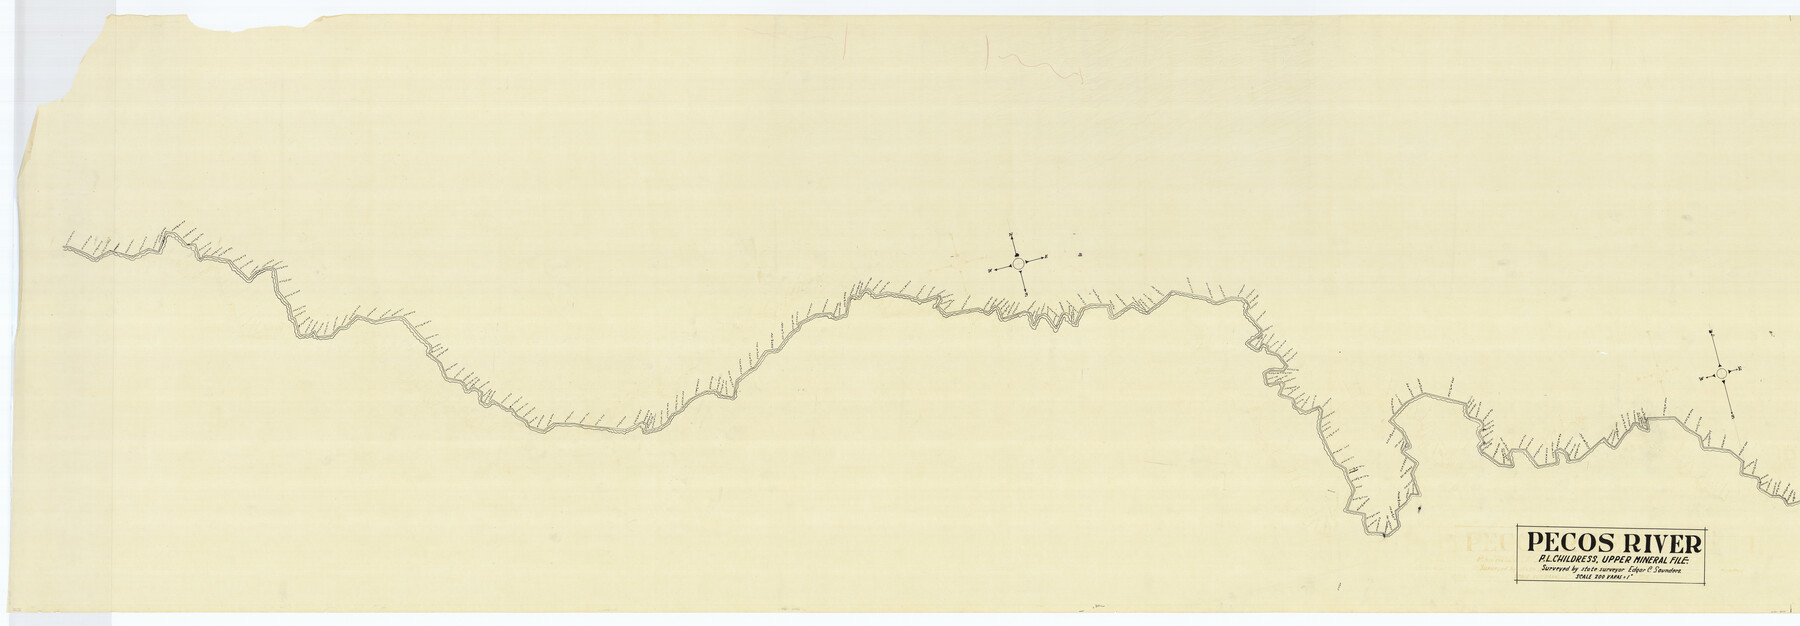 76024, [Sketch for Mineral Application 16696-16697, Pecos River], General Map Collection